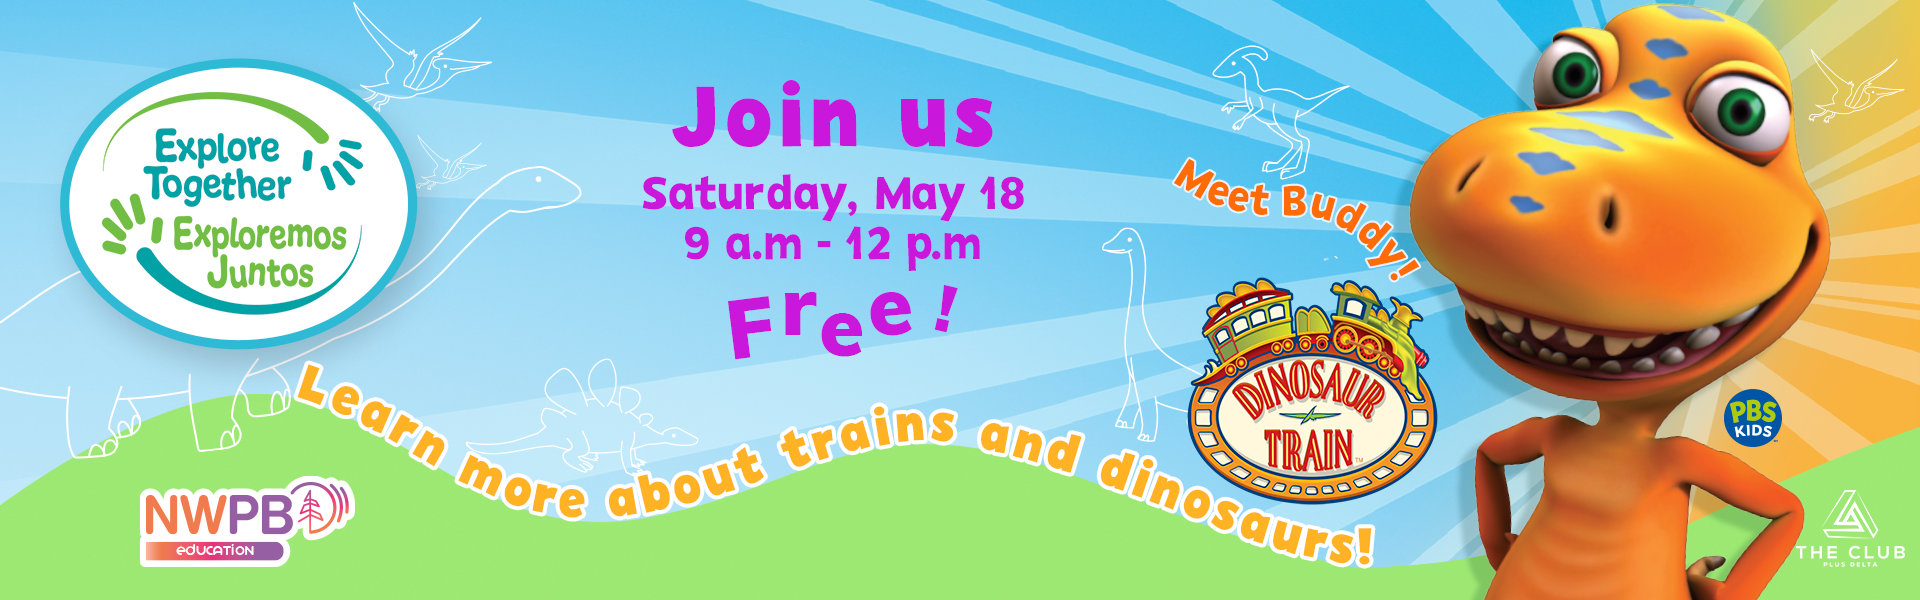 Explore Together - Learn more about trains and dinosaurs. Join us Saturday, May 18 9:00 AM - 12:00 PM